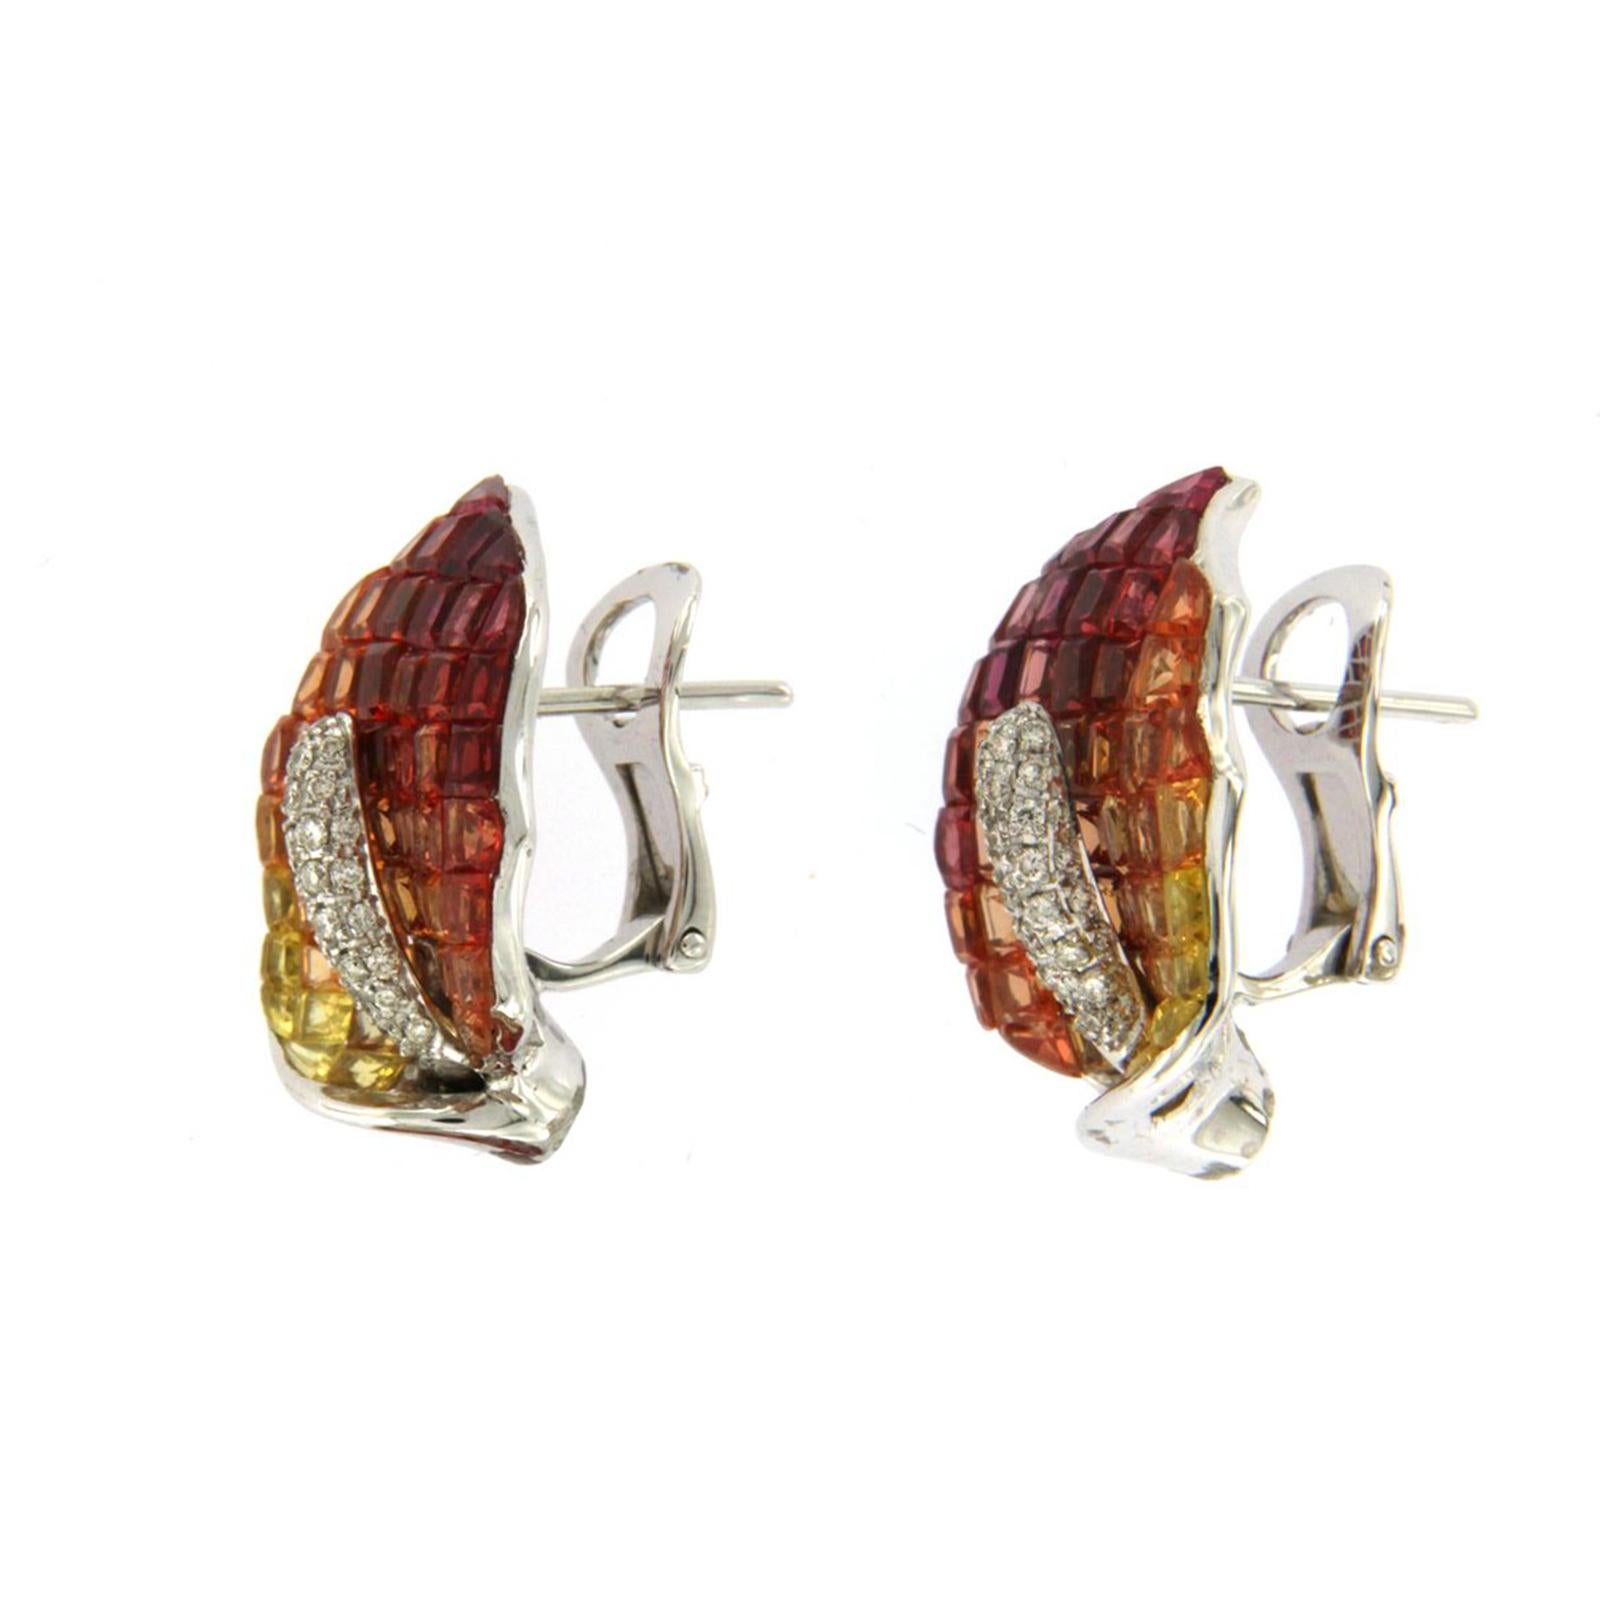 18k Gold .09 Ct Diamonds Invisible Set 12.6 Ct Orange Sapphire Earrings In Excellent Condition For Sale In Los Angeles, CA